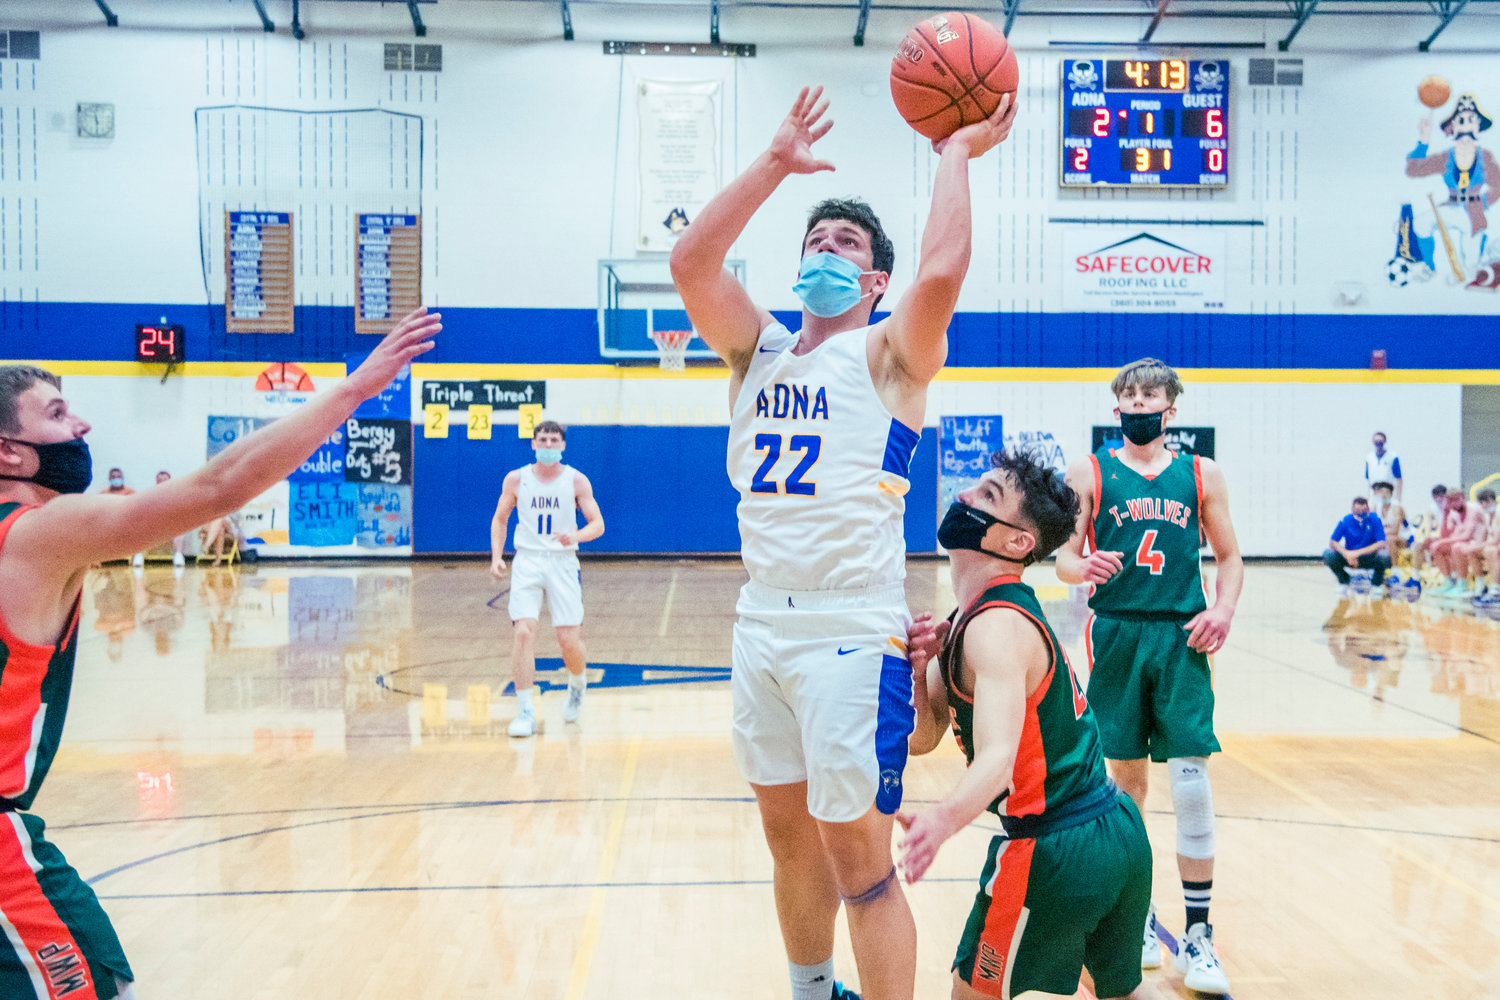 Adna’s Tyler Minkoff (22) goes up for a shot during a game against MWP on Tuesday.